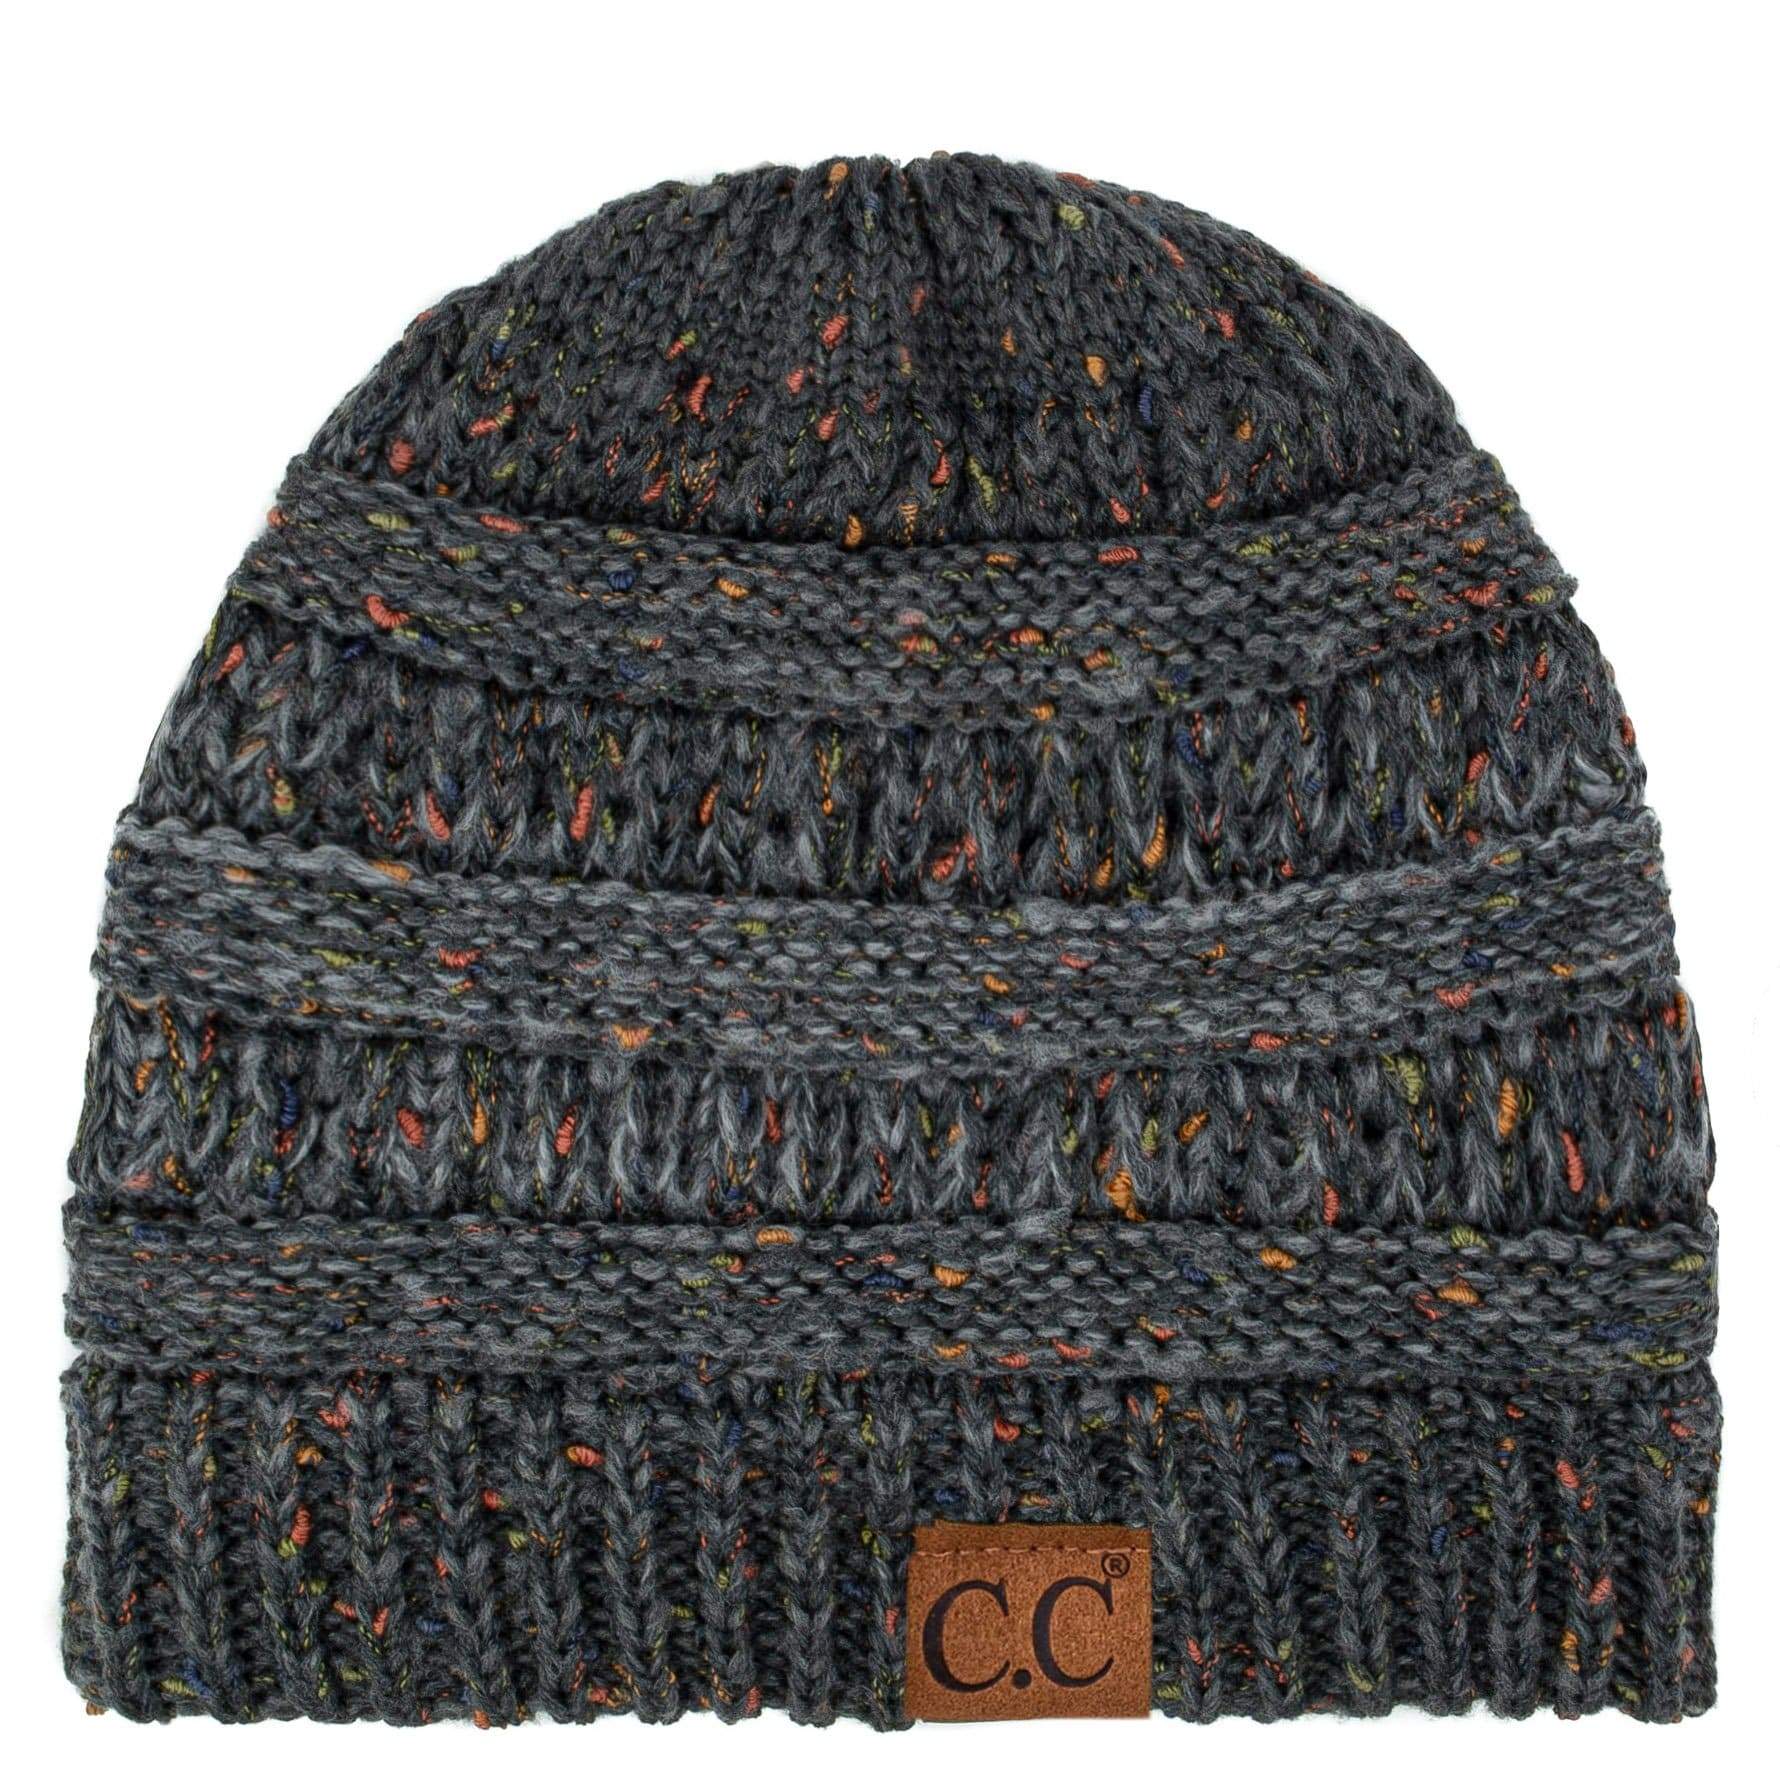 C.C Apparel Ombre Dk Melange Grey C.C Trendy Warm Chunky Soft Stretch Ombre Cable Knit Beanie Skully